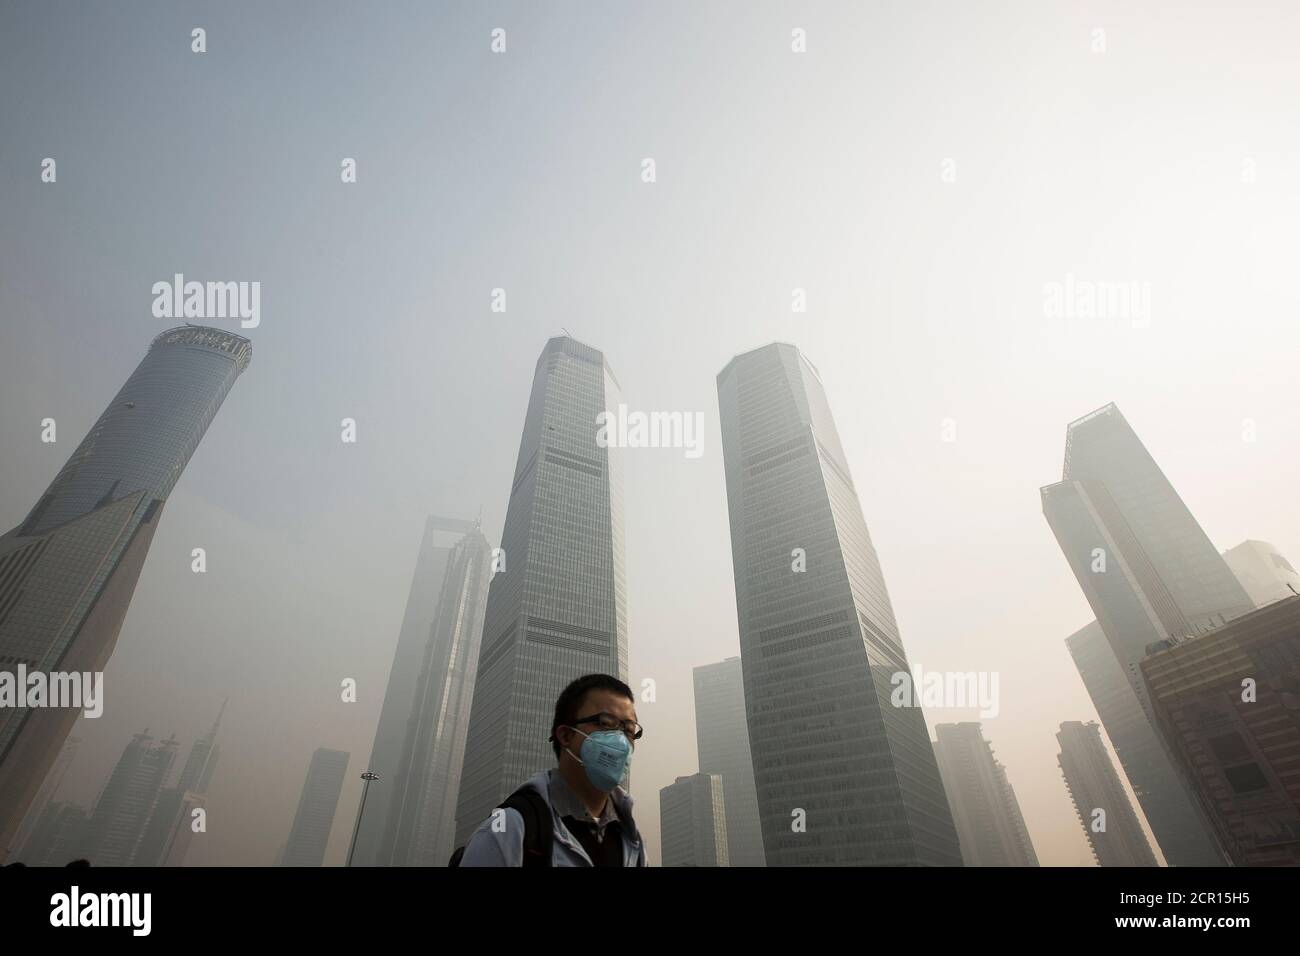 A man wears a mask while walking on a bridge during a hazy day in Shanghai's financial district of Pudong December 5, 2013. Hazardous air pollution forced schools to shut or suspend outdoor activities in at least two cities in eastern China, where residents complained of the yellow skies and foul smells that are symtomatic of the country's crippling smog crisis. Nanjing suspended classes in primary and secondary schools and Qingdao banned outdoor activities, said the official Xinhua news agency.   REUTERS/Aly Song  (CHINA - Tags: BUSINESS ENVIRONMENT) Stock Photo